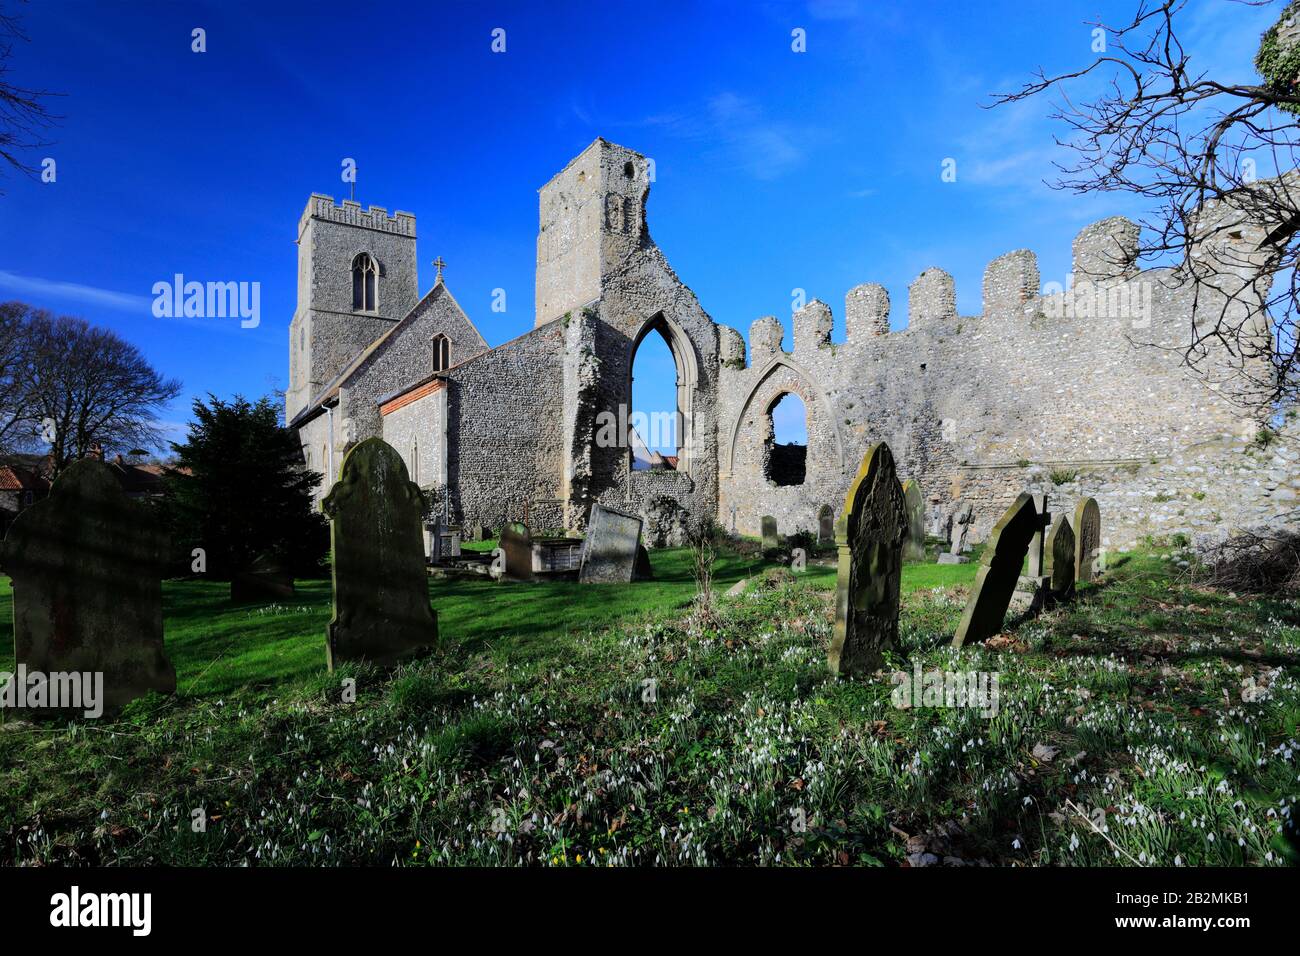 View of Weybourne Priory and All Saints Church, Weybourne village, North Norfolk, England, UK Stock Photo